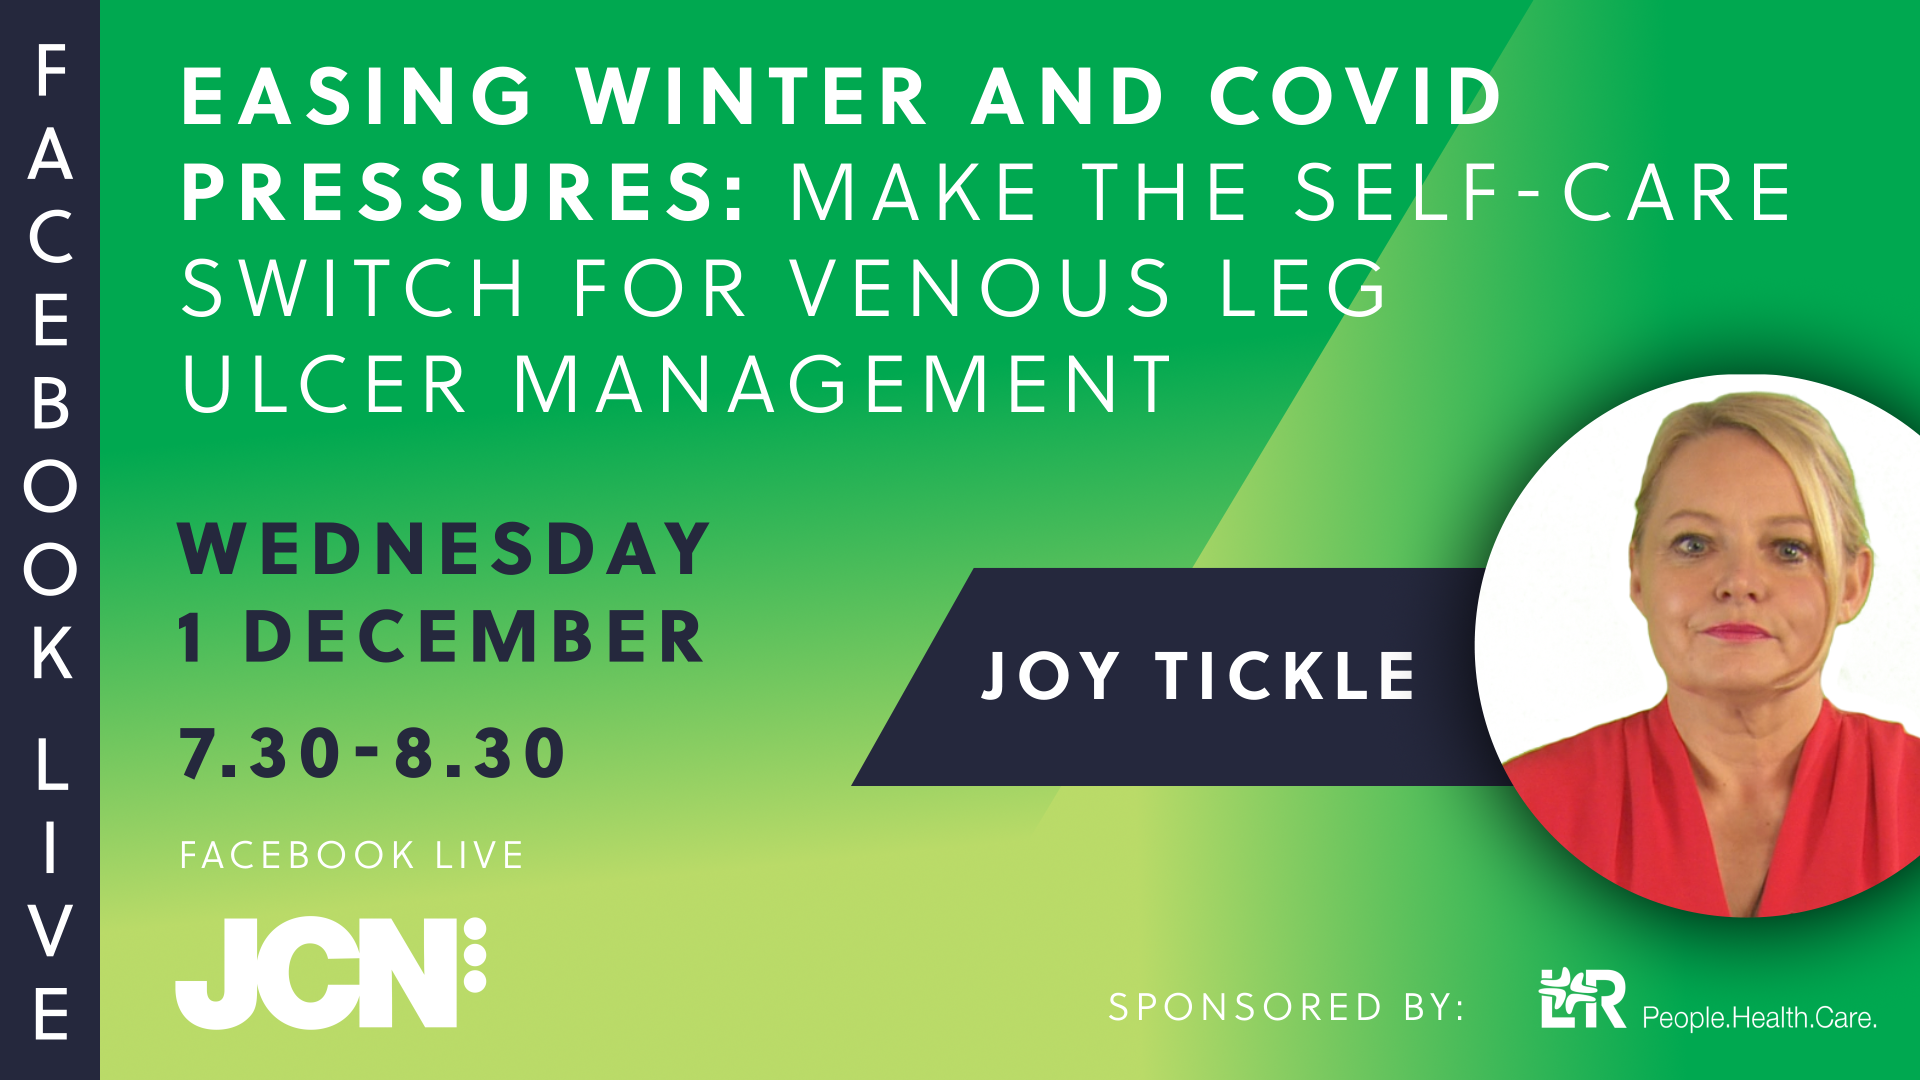 Facebook live: Easing Winter and COVID Pressures: Make the self-care switch for venous leg ulcer management